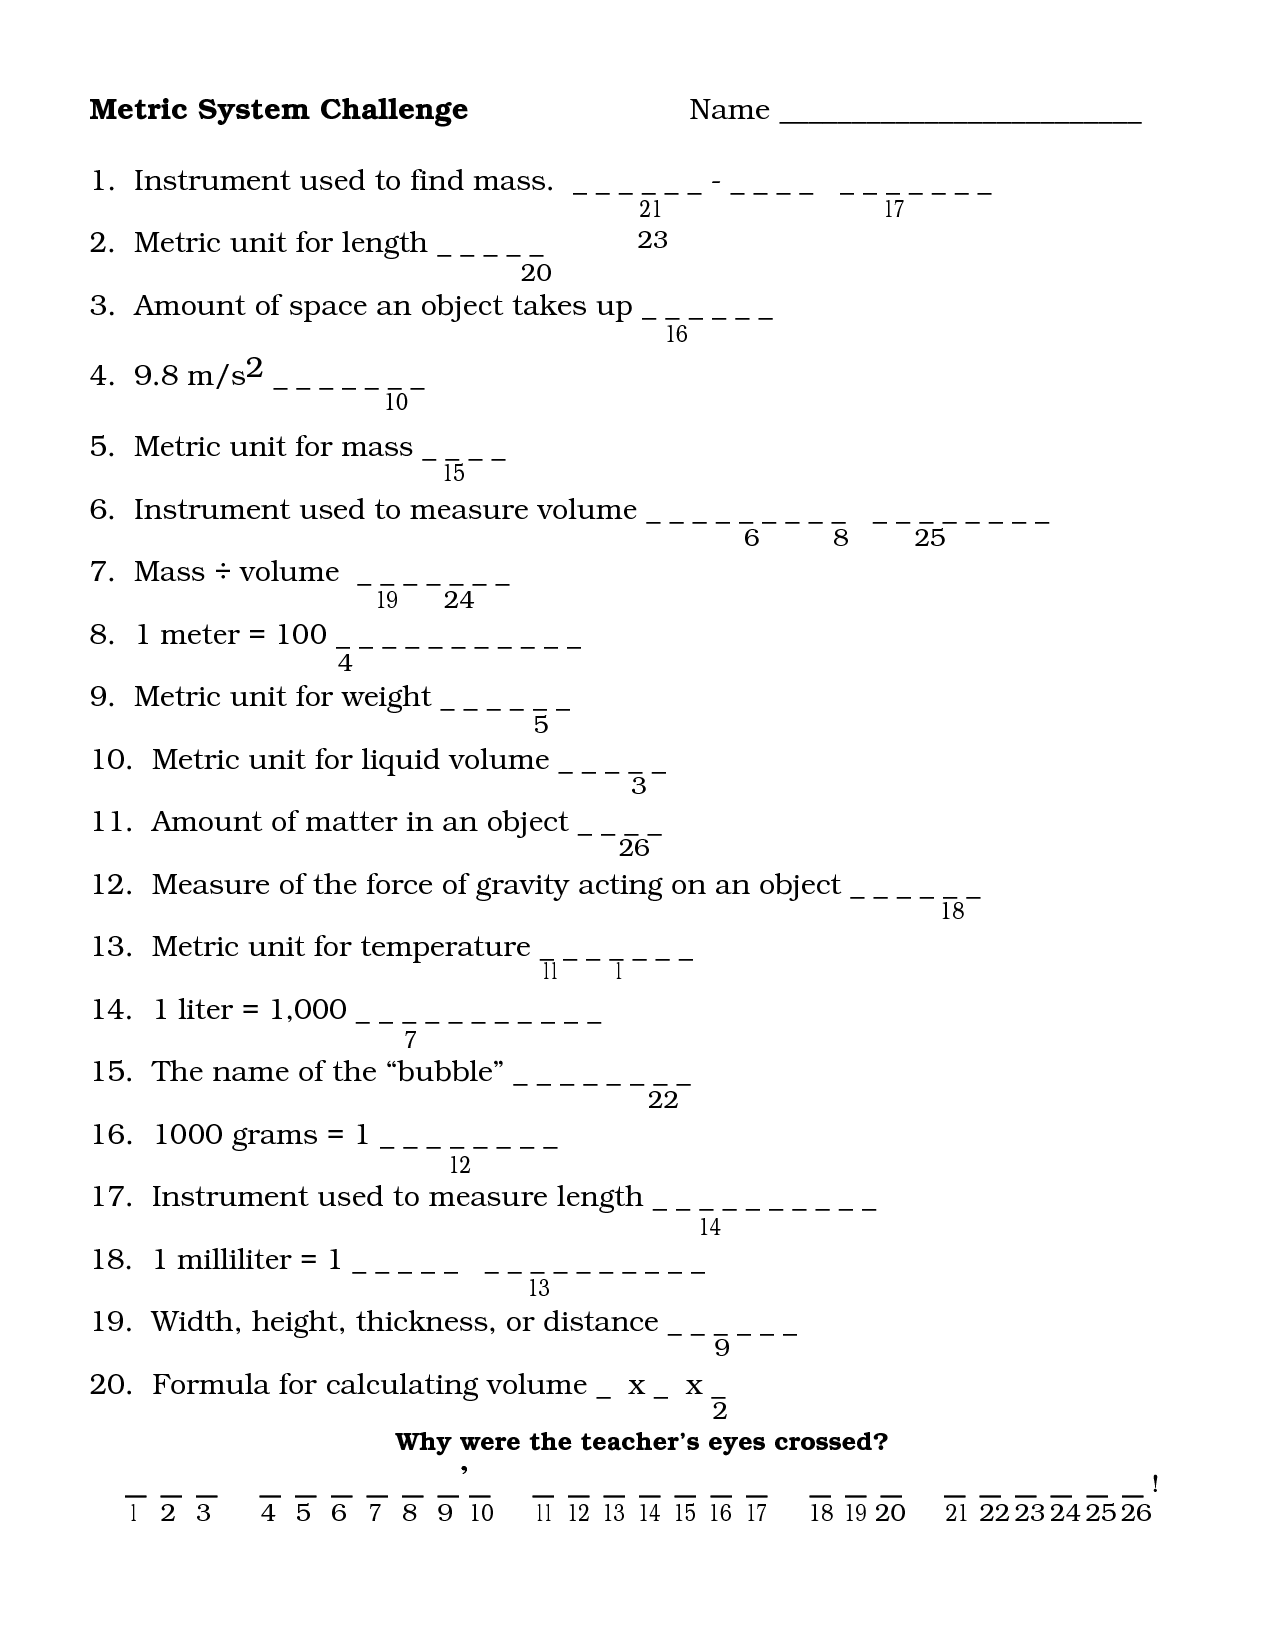 Metric System Challenge Worksheet Answers Image